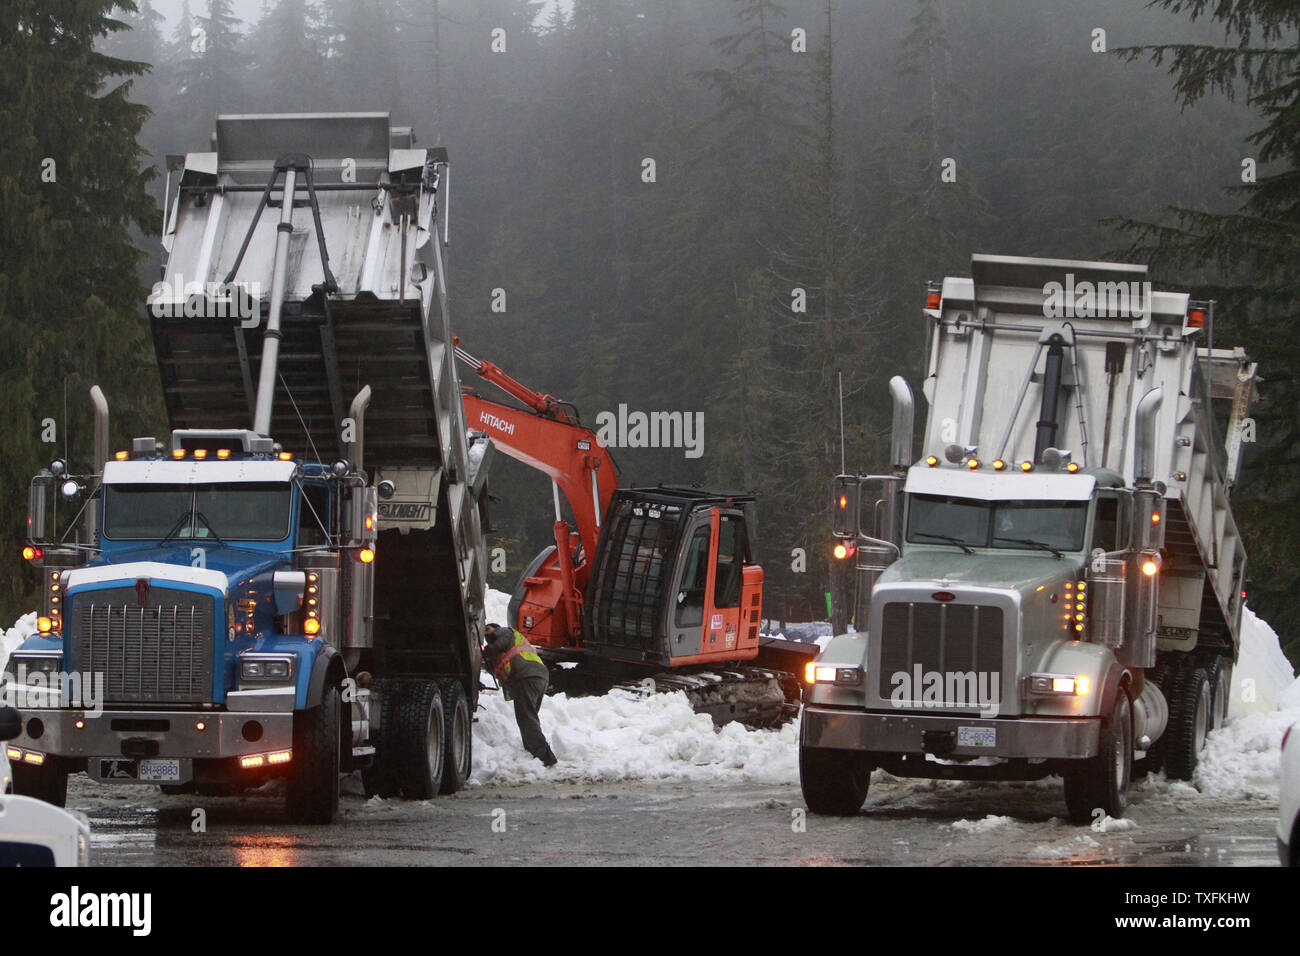 Trucks haul in snow as crews continue to build the snowboard half-pipe and ski-cross courses for the 2010 Winter Olympics at the Cypress Mountain venue in West Vancouver, Canada on February 11, 2010. High temperatures and rain continues to cause problems at the Cypress Mountain venue in the lead-up to the Winter Games which begin February 12, 2010.     UPI/Brian Kersey Stock Photo